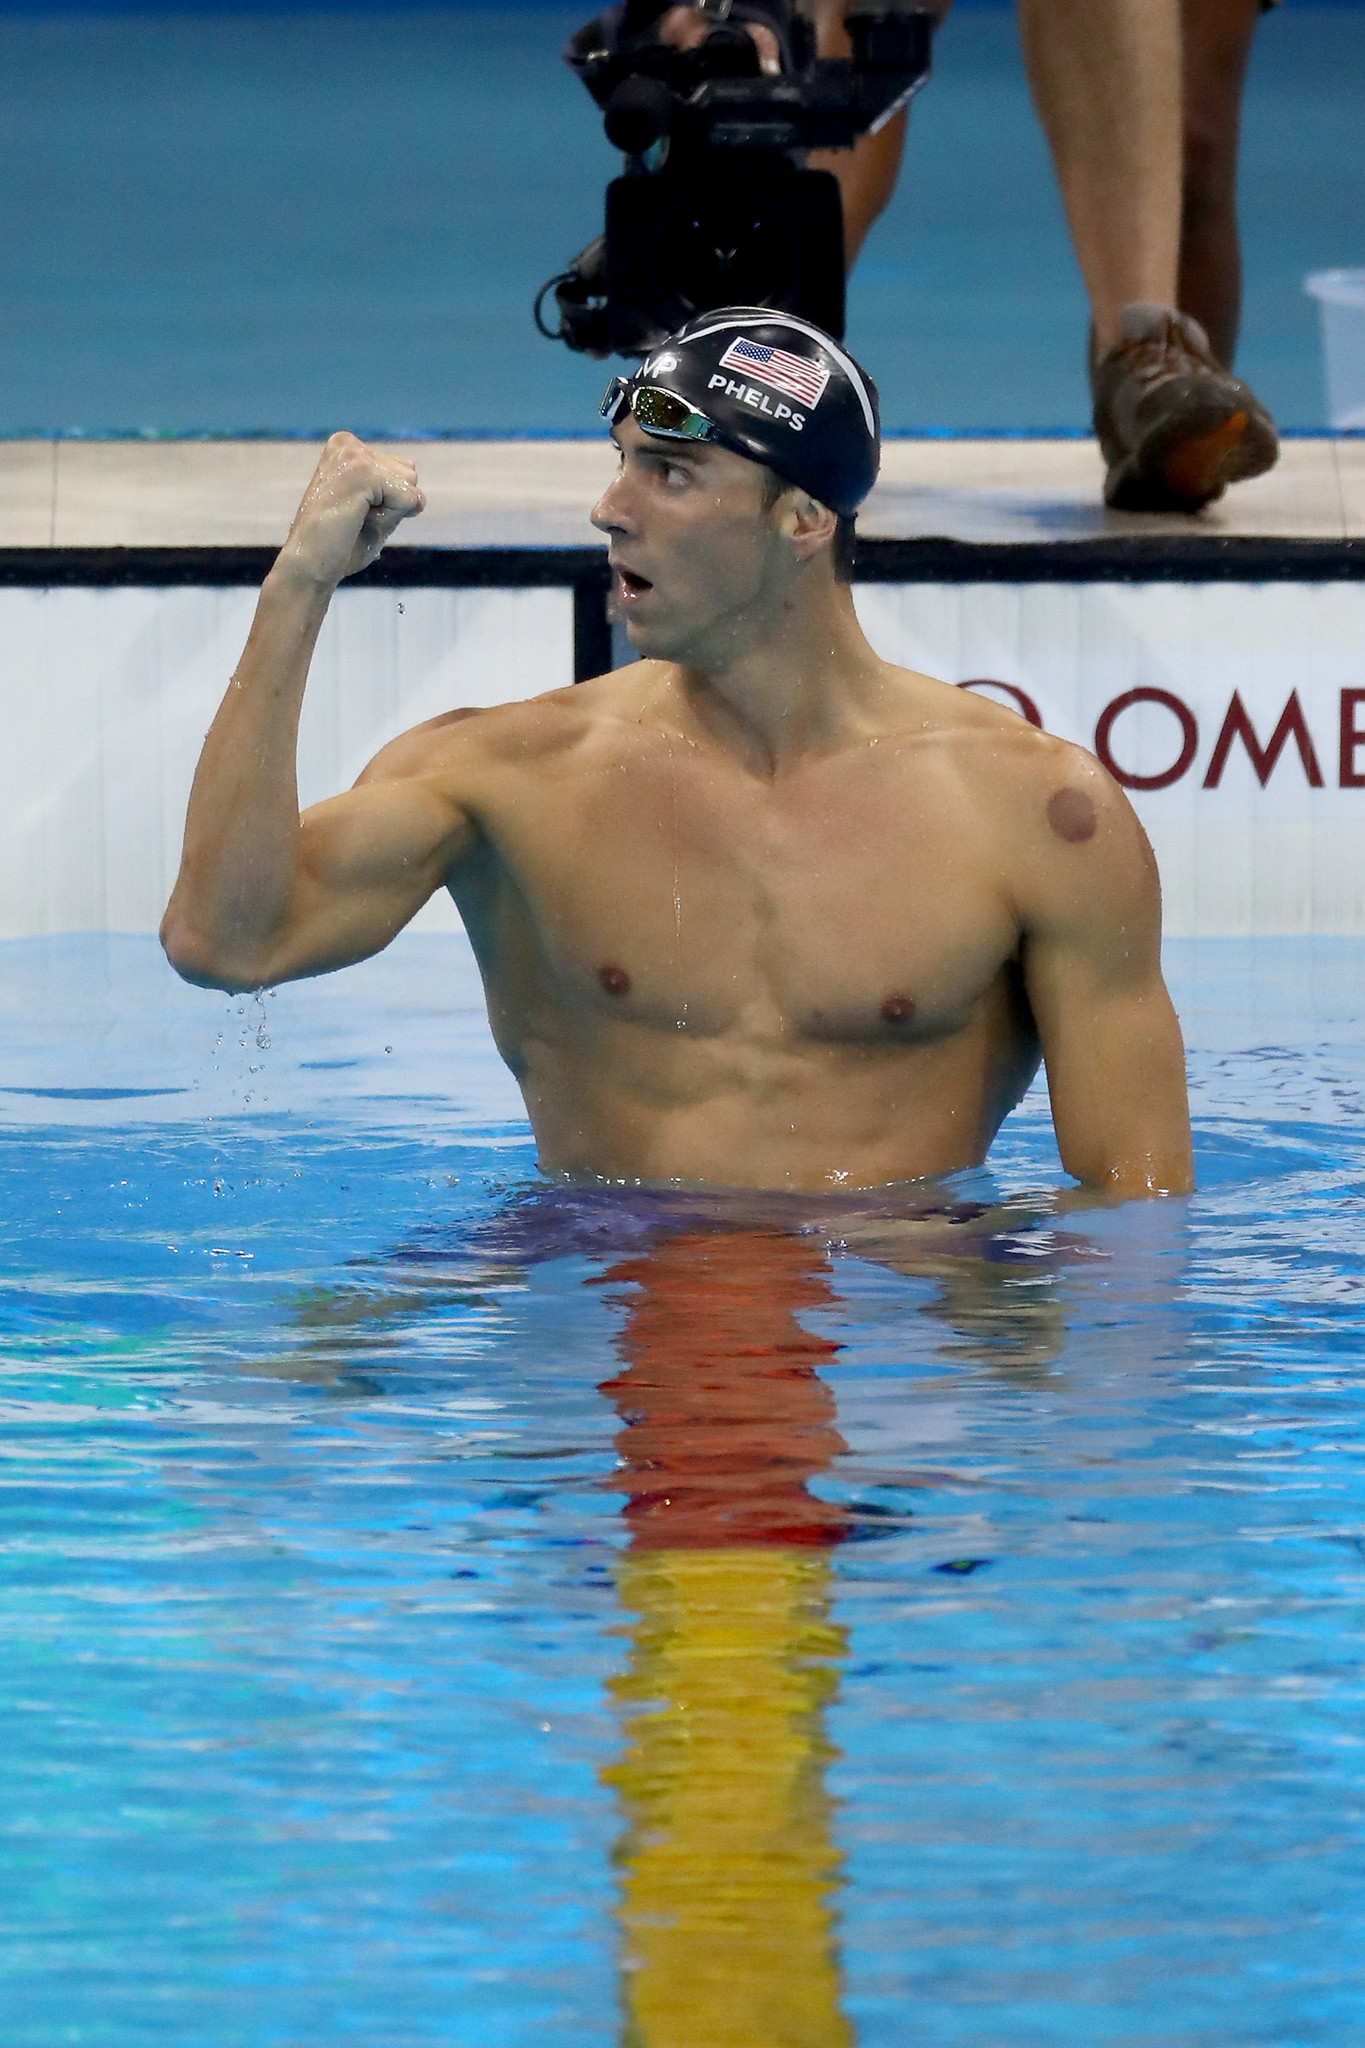 Popular Brazilian swimmer on Michael Phelps: 'Don't mess with the king